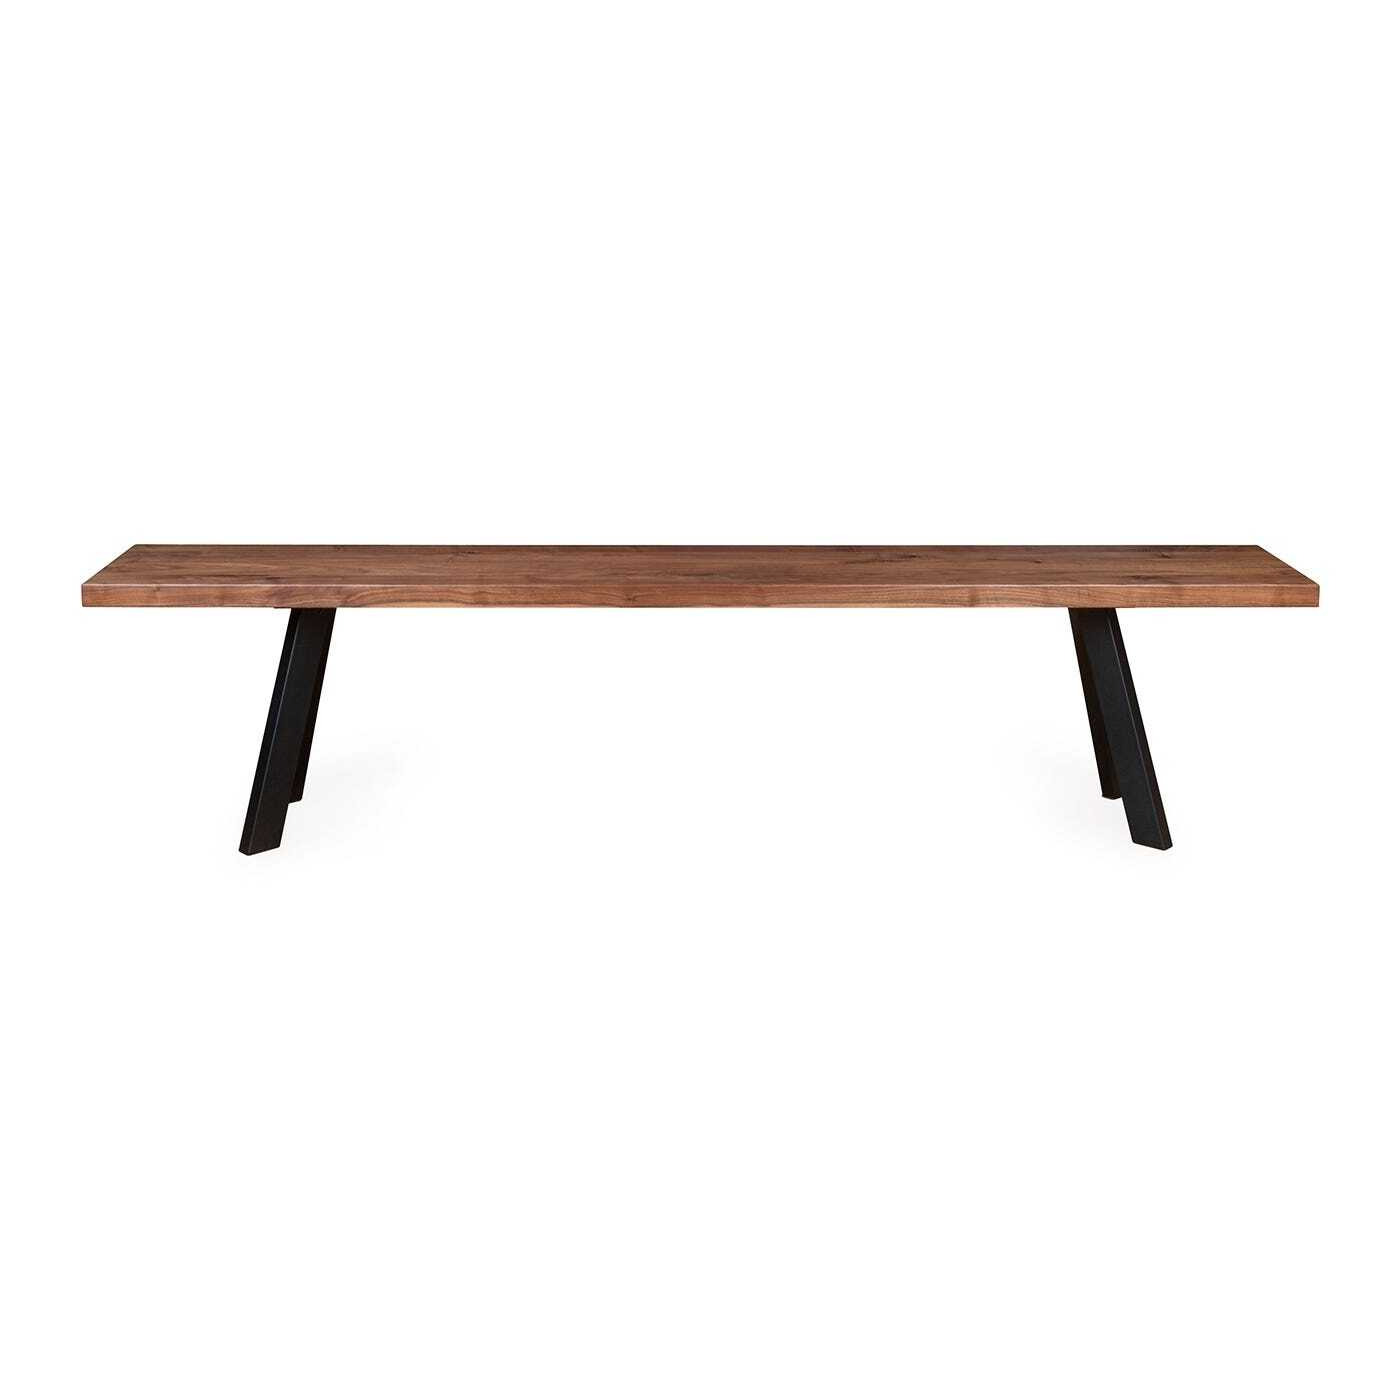 Heal's Madrid Bench 260x35cm Natural Oak Straight Edge Not Filled - Heal's UK Furniture